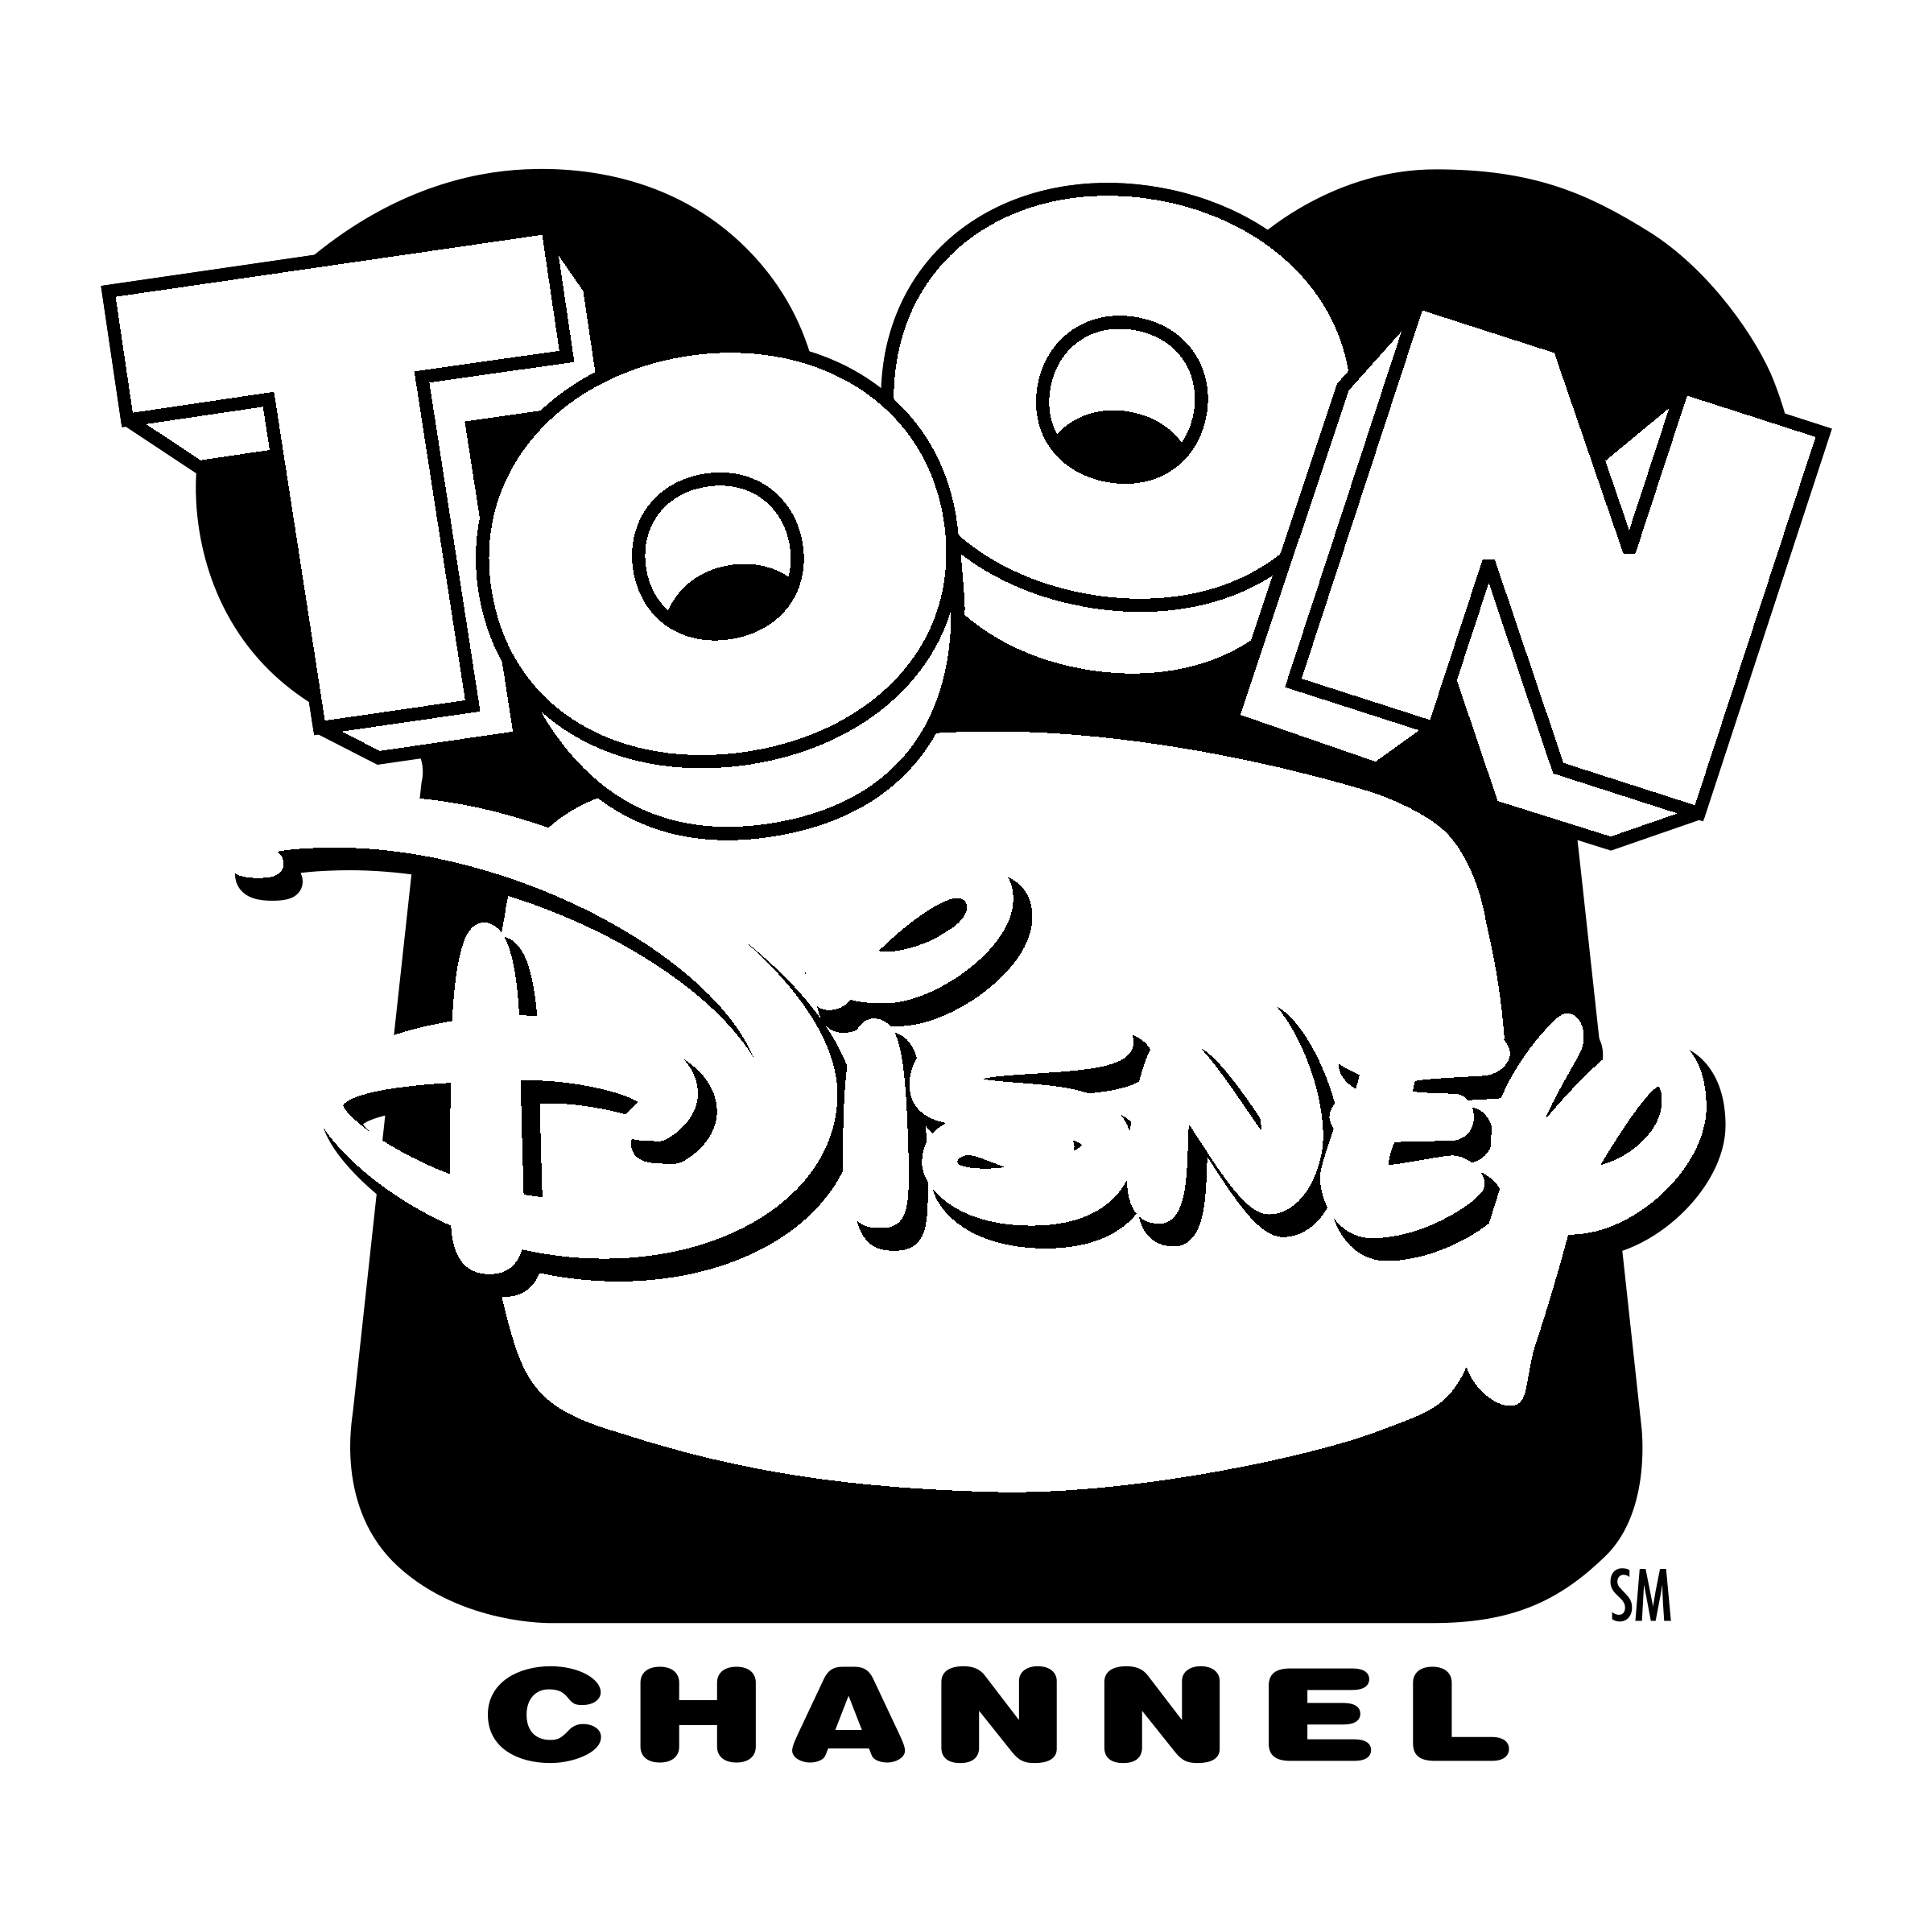 Download Disney Logo Vector at Vectorified.com | Collection of ...